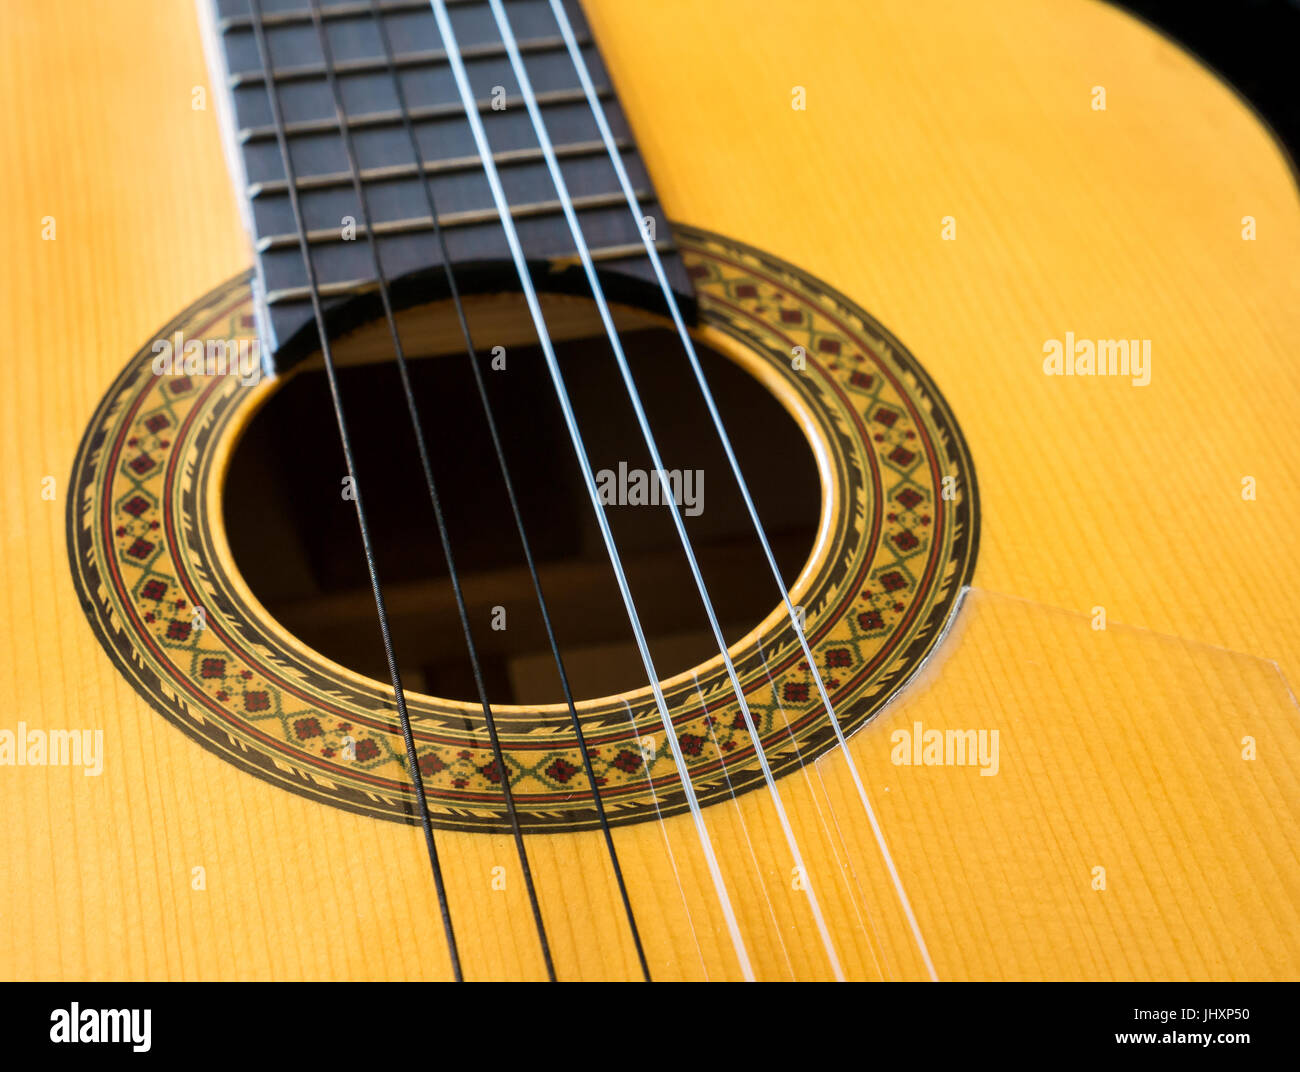 Close up of Antonio Sanchez classical guitar with fingerboard, frets,  decorative sound hole and strings Stock Photo - Alamy